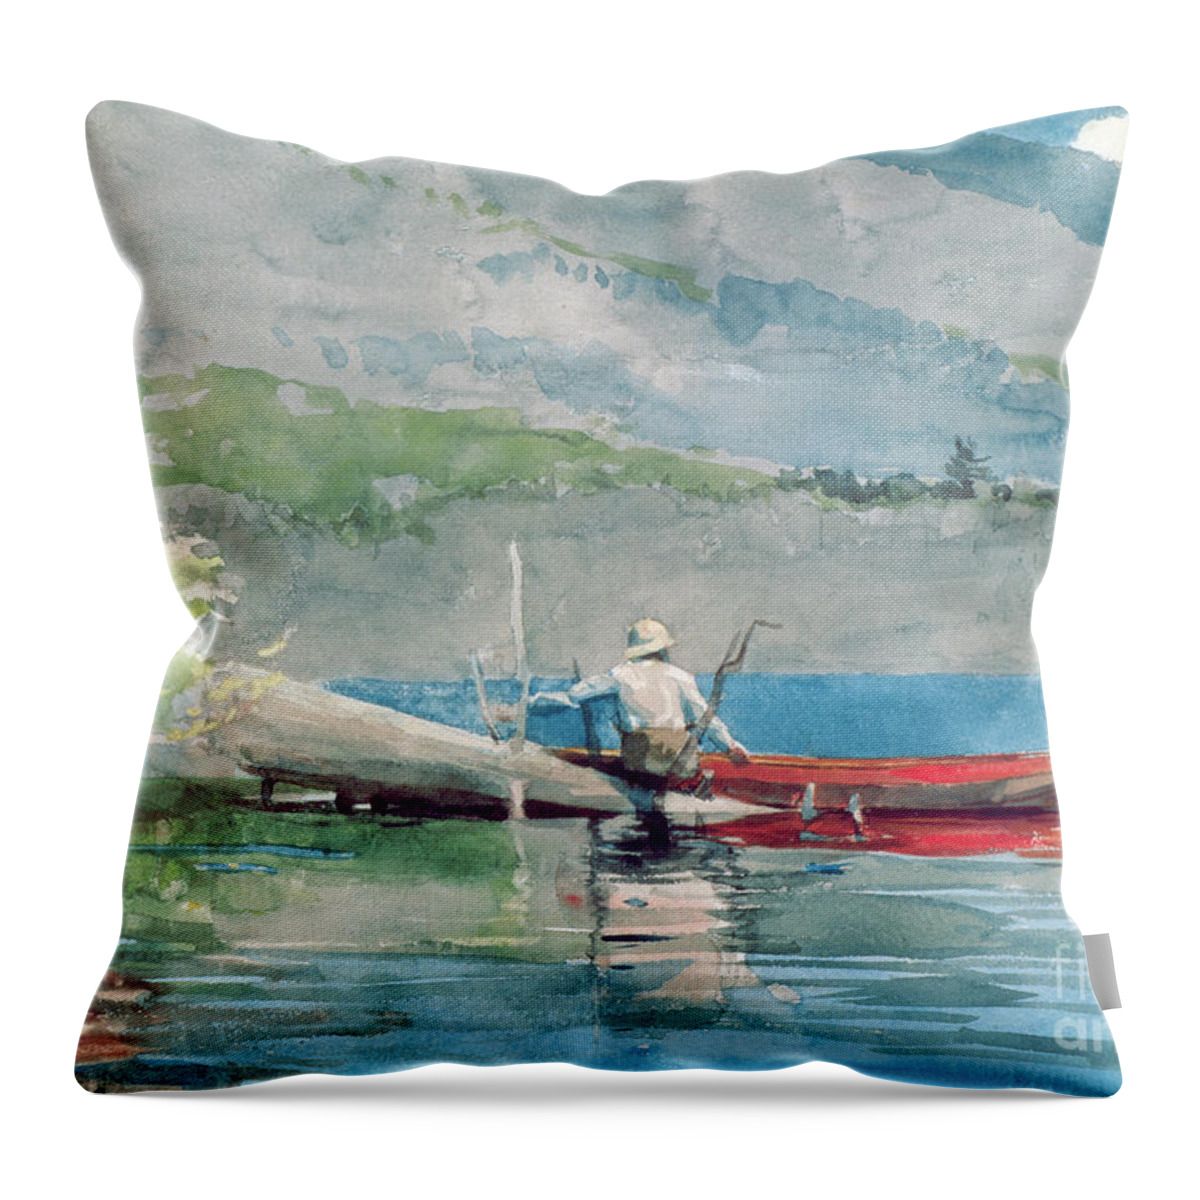 The Red Canoe Throw Pillow featuring the painting The Red Canoe by Winslow Homer